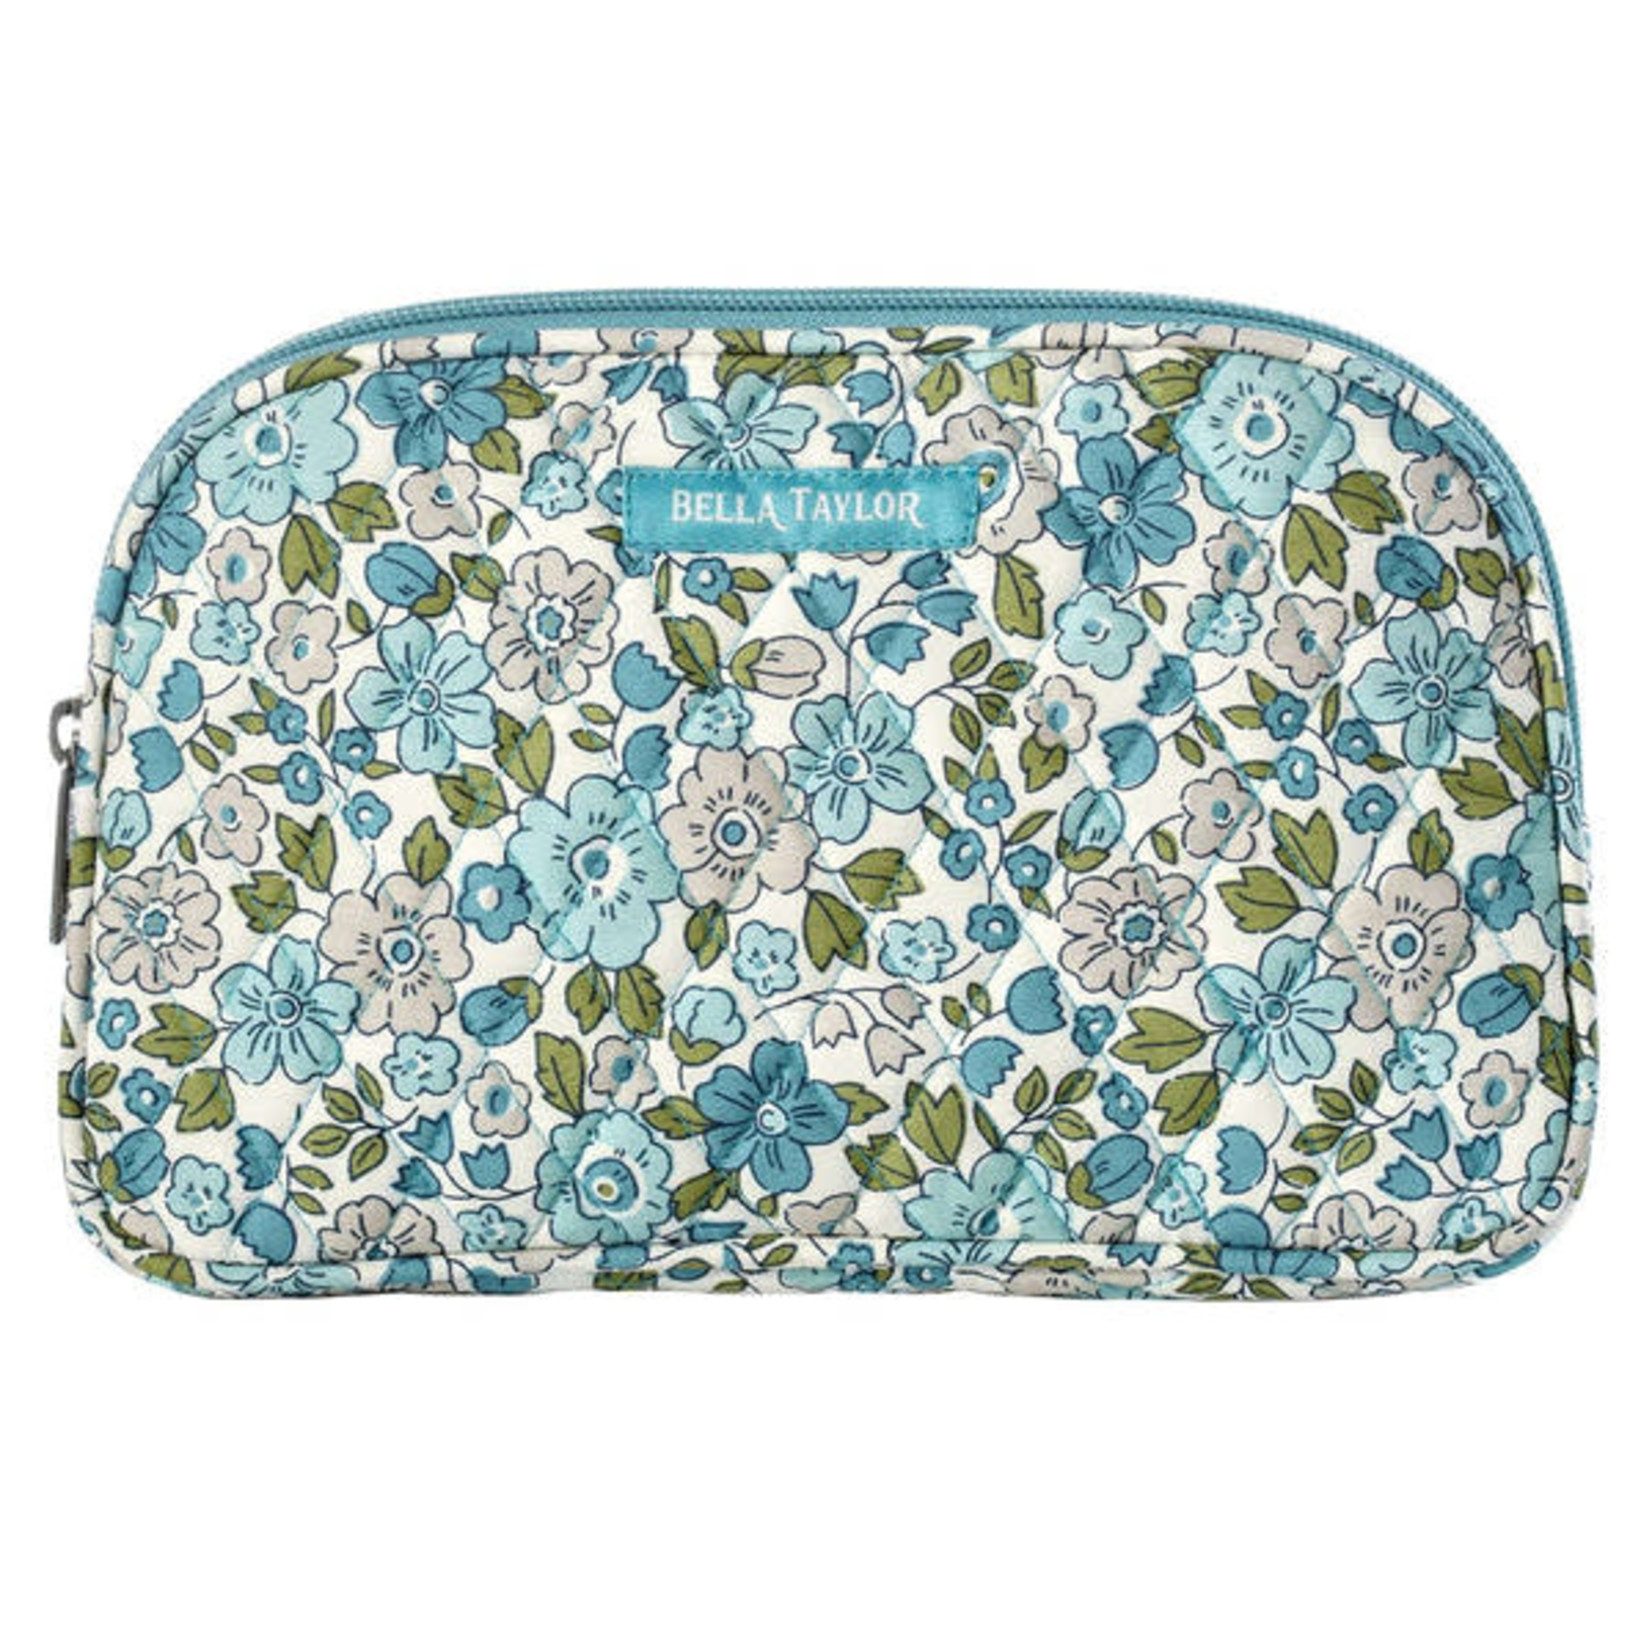 Bella Taylor Delicate Floral Blue - Cosmetic Pouch